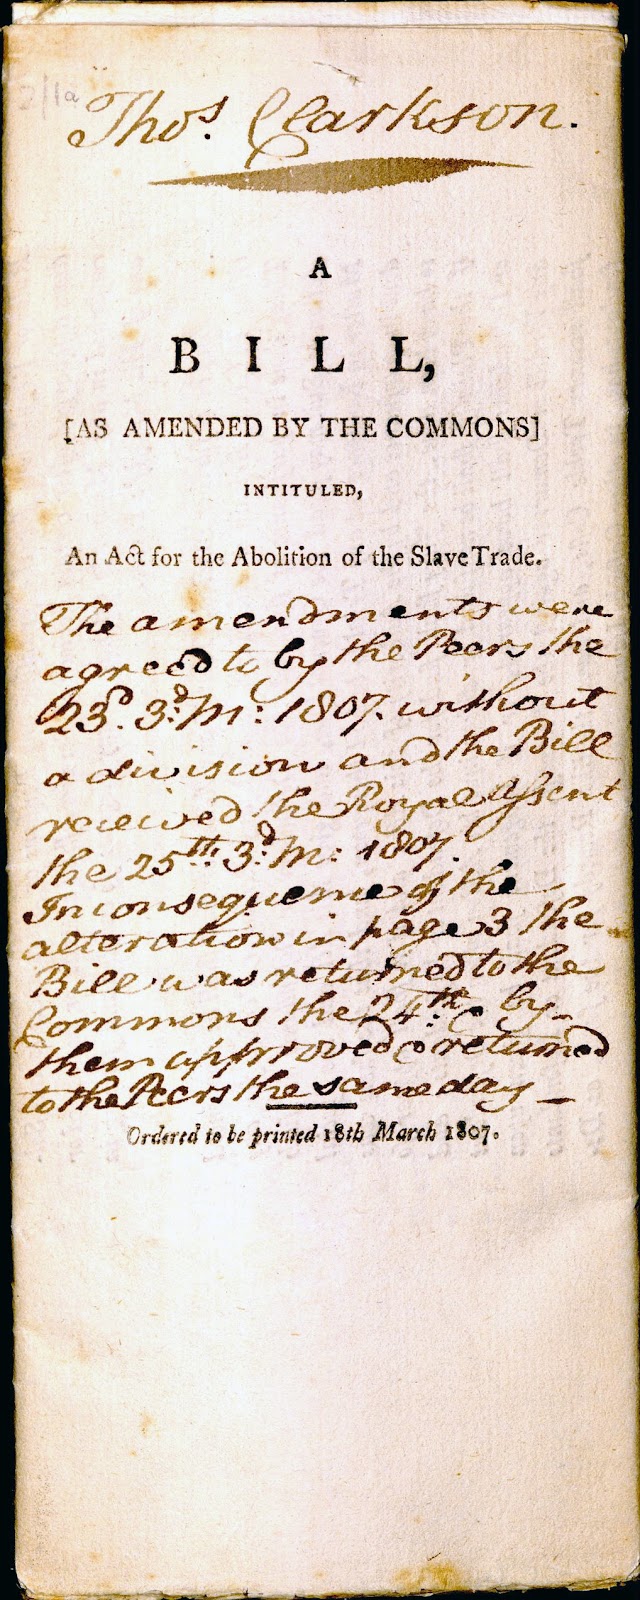 An Act for the Abolition of the Slave Trade